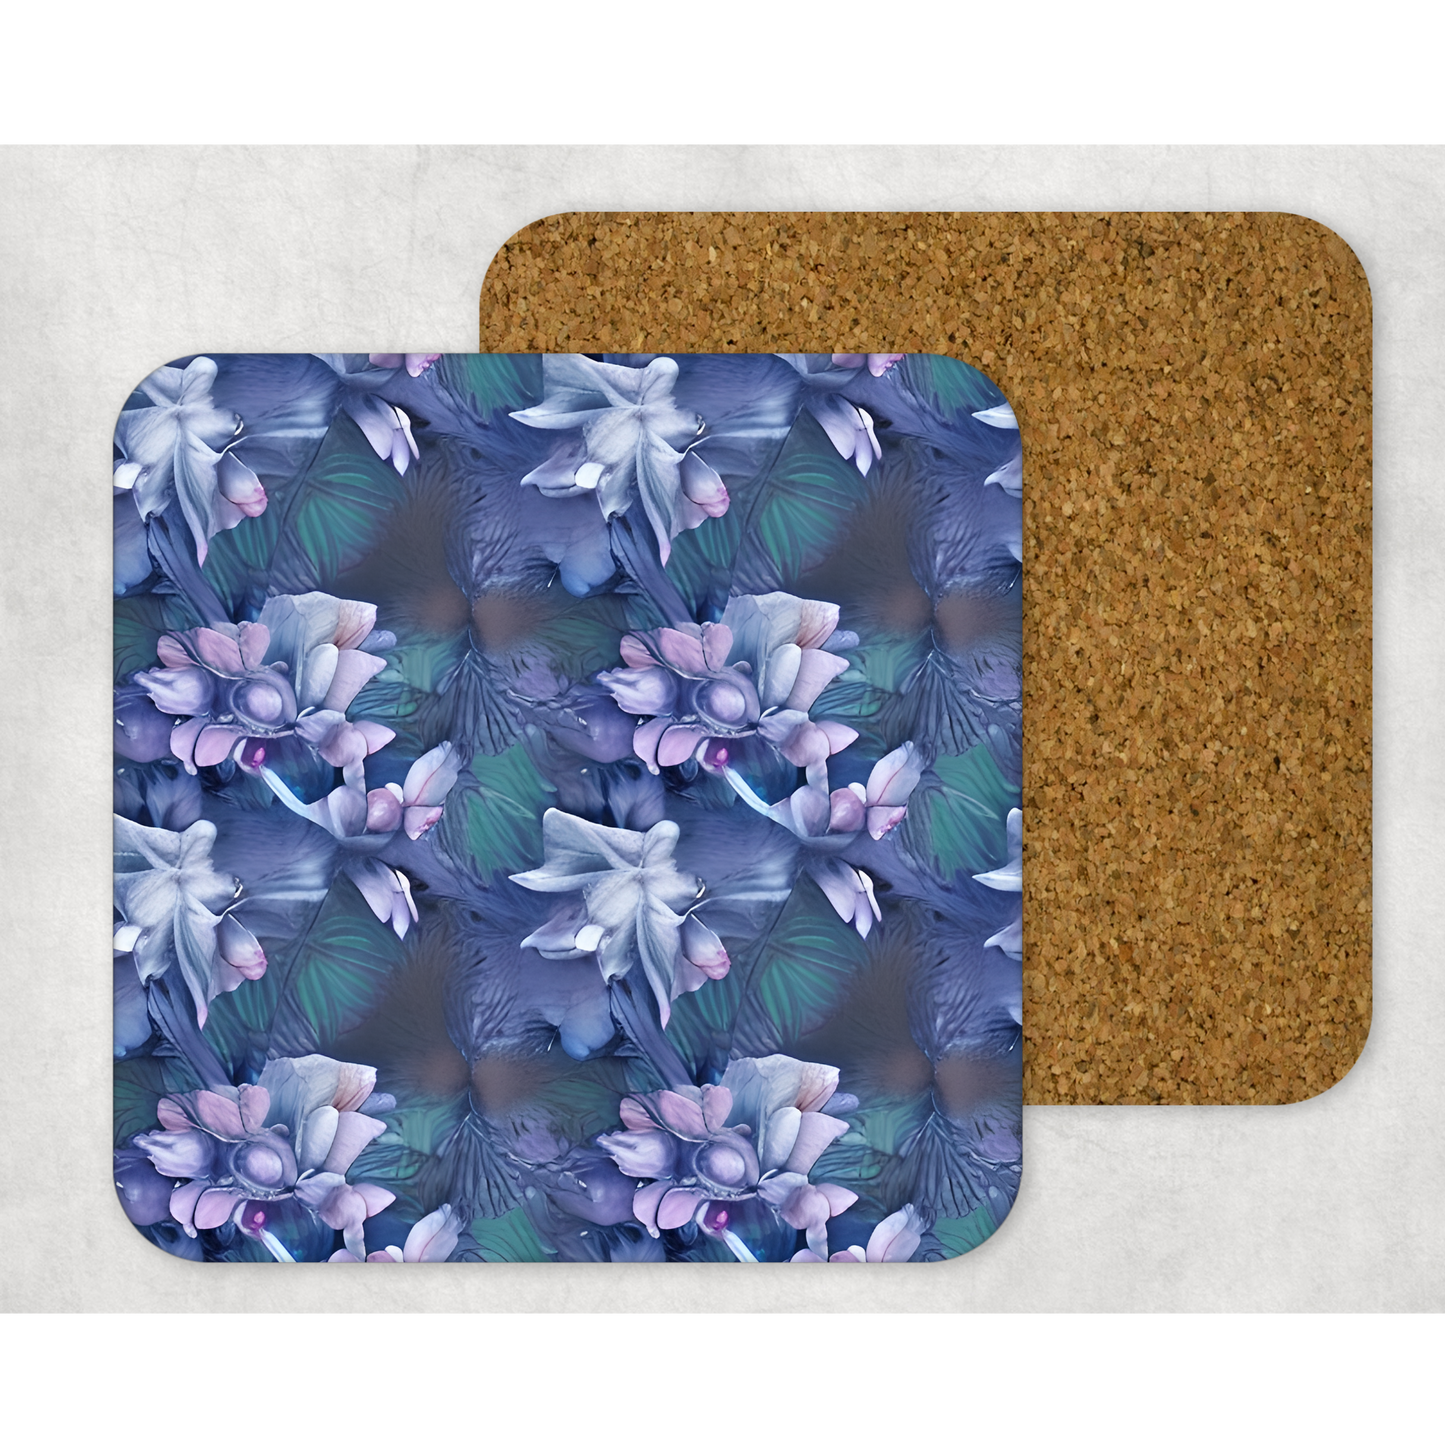 Beautifully Printed 3D Moody Indigo Flowers Wooden Coasters for Stylish Home Décor